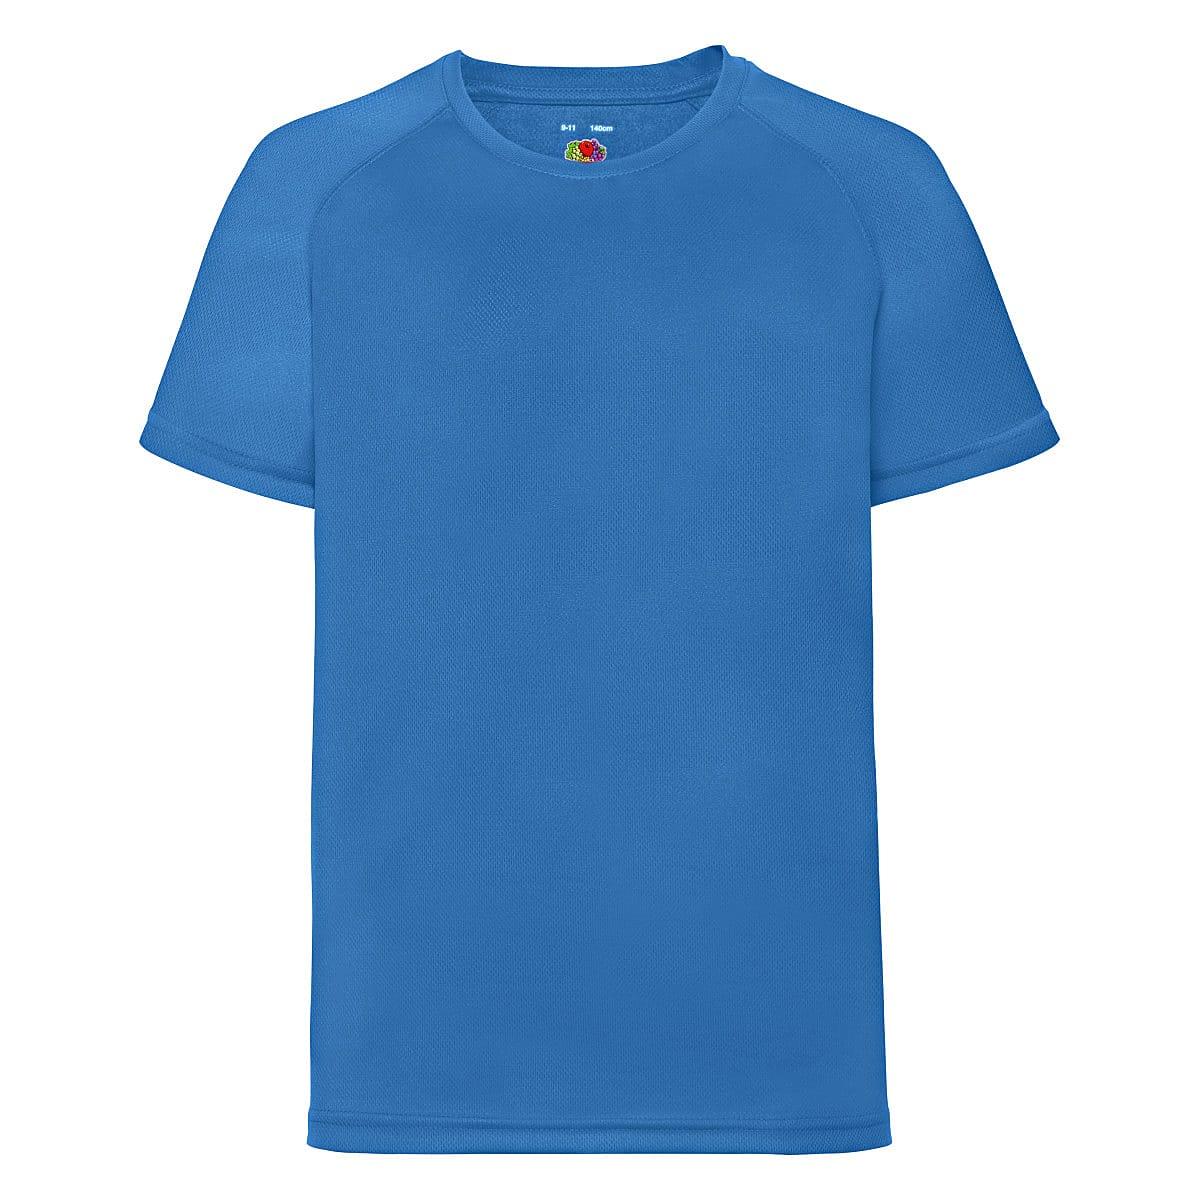 Fruit Of The Loom Childrens Kids Performance T-Shirt in Azure Blue (Product Code: 61013)